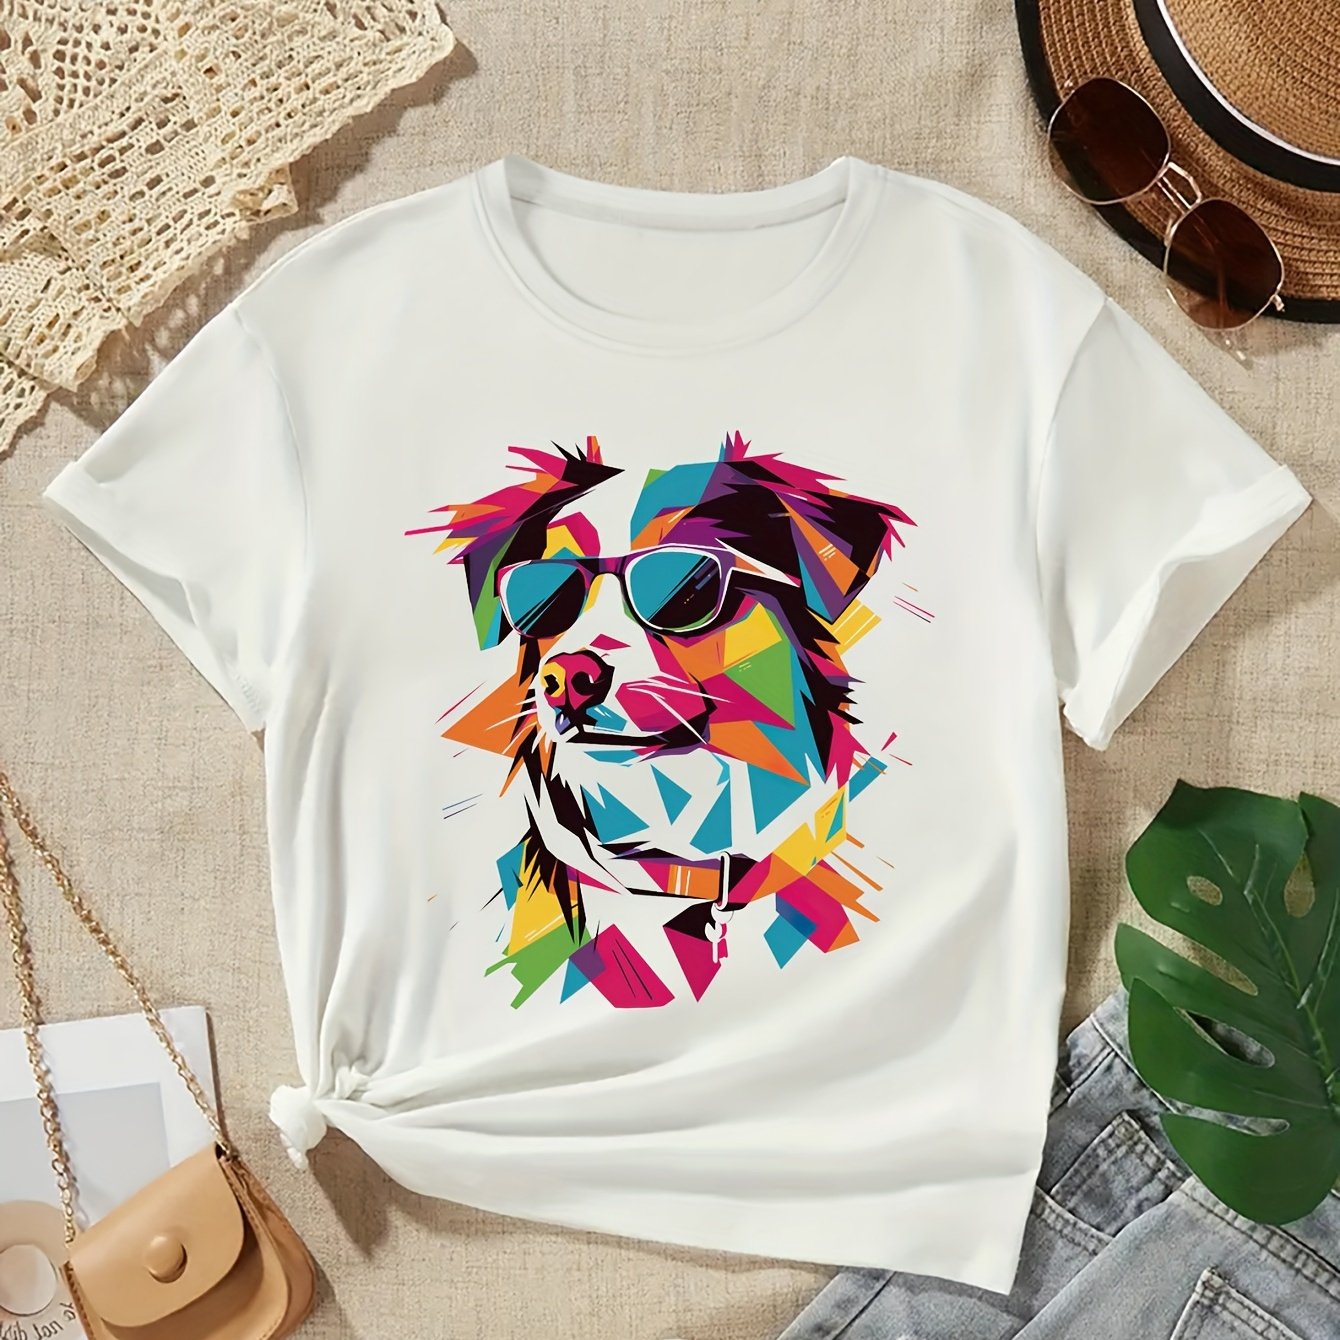 

Colorful Anime Dog With Sunglasses Graphic Print, Tween Girls' Casual & Comfy Crew Neck Short Sleeve Tee For Spring & Summer, Tween Girls' Clothes For Outdoor Activities